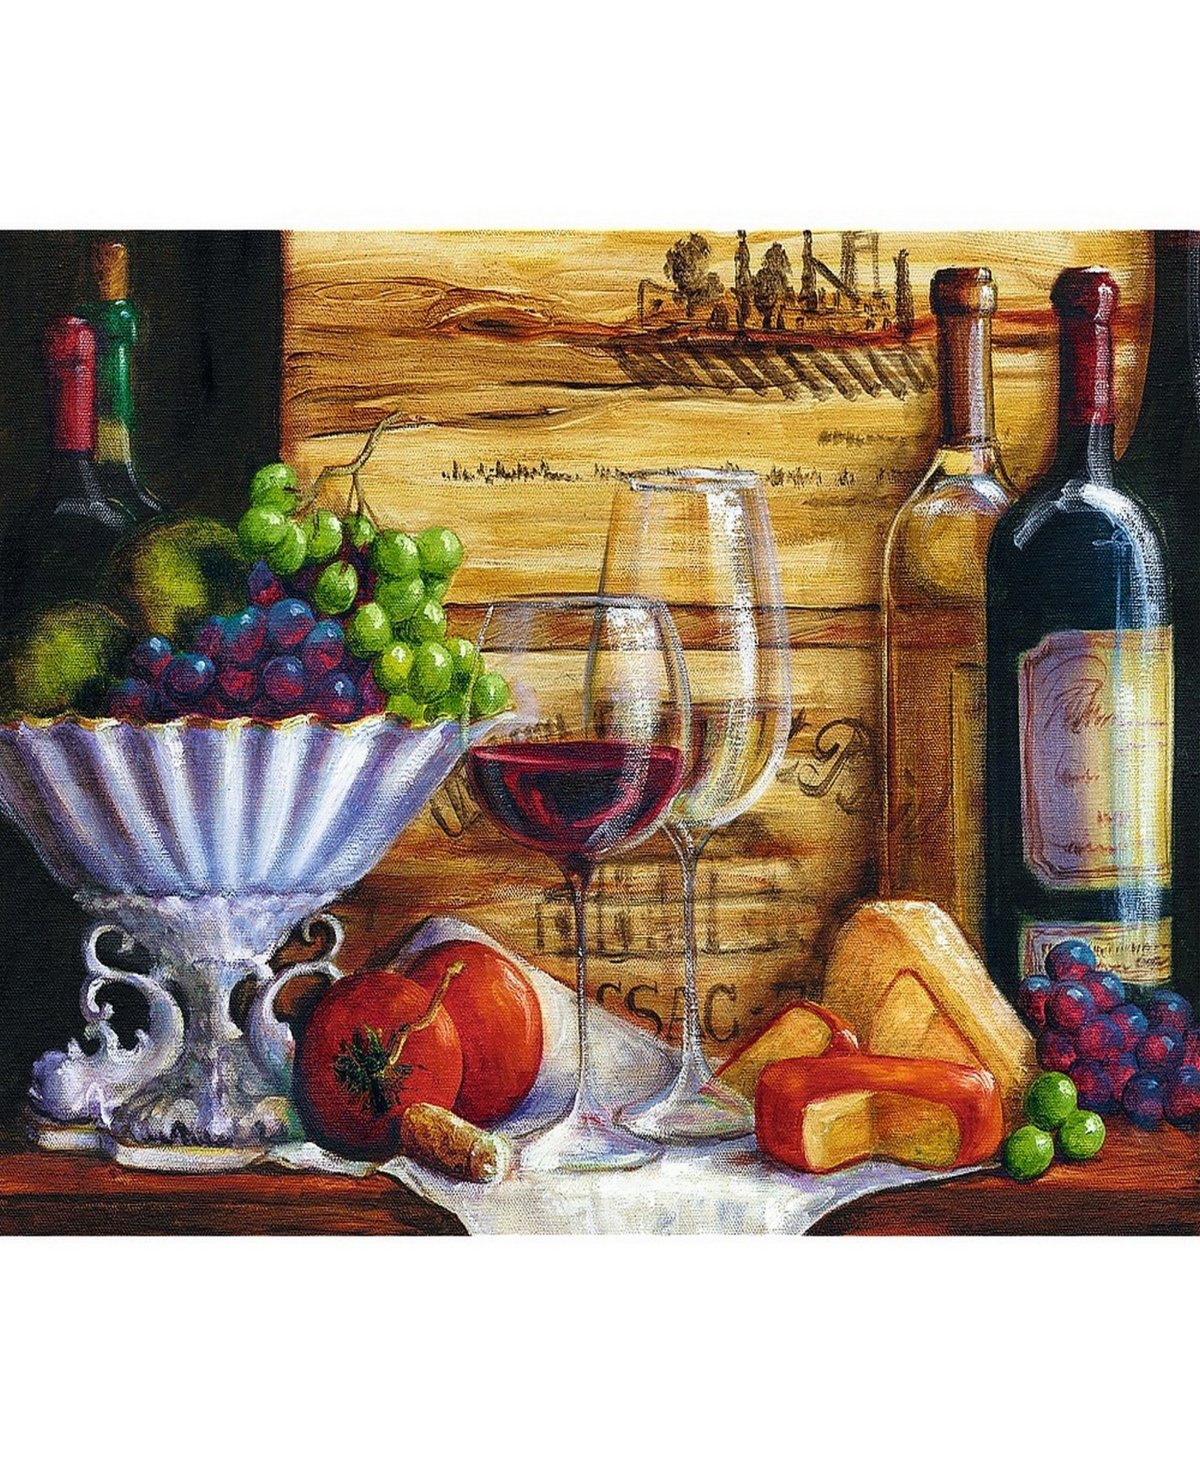 Shop Trefl Jigsaw Puzzle In The Vineyard By Malenda Trick, 1500 Pieces In Multicolor